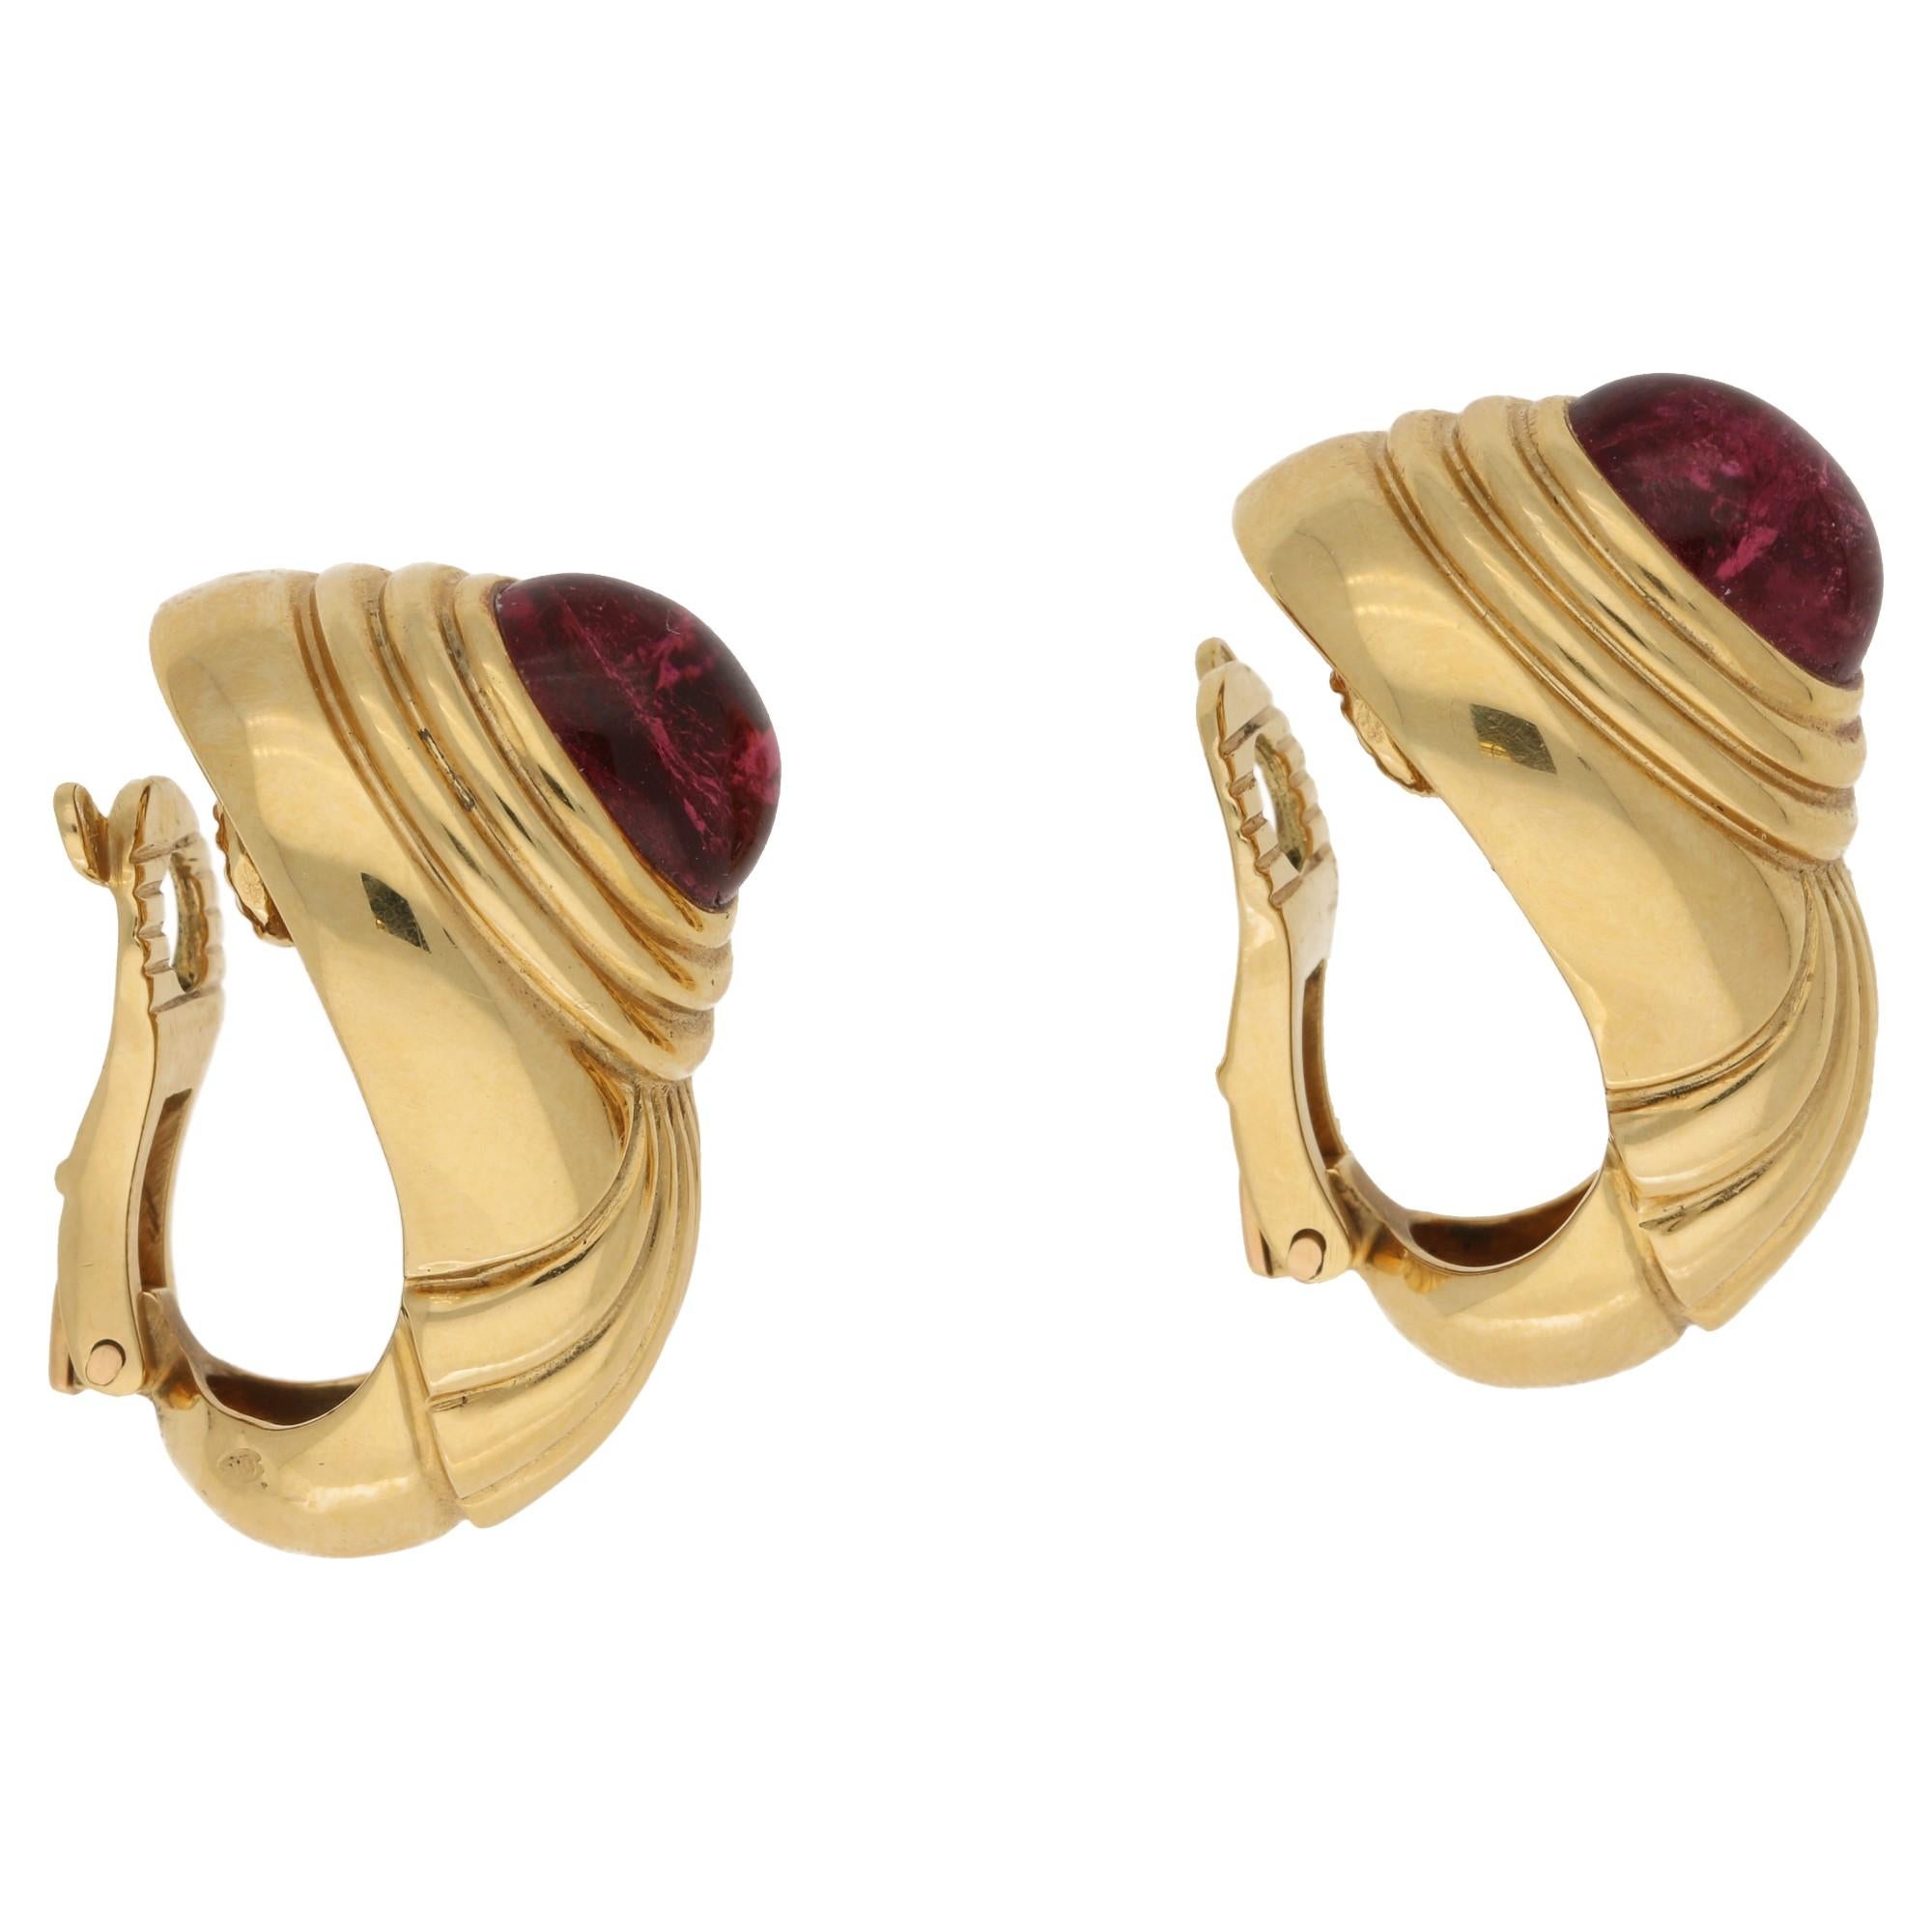 A fine pair of vintage signed boucheron earrings featuring pink tourmaline in a rich 18k ellow gold setting. These measure 16mm by 25mm approximately and are clip on earrings. We can however add a post for pierced ears.